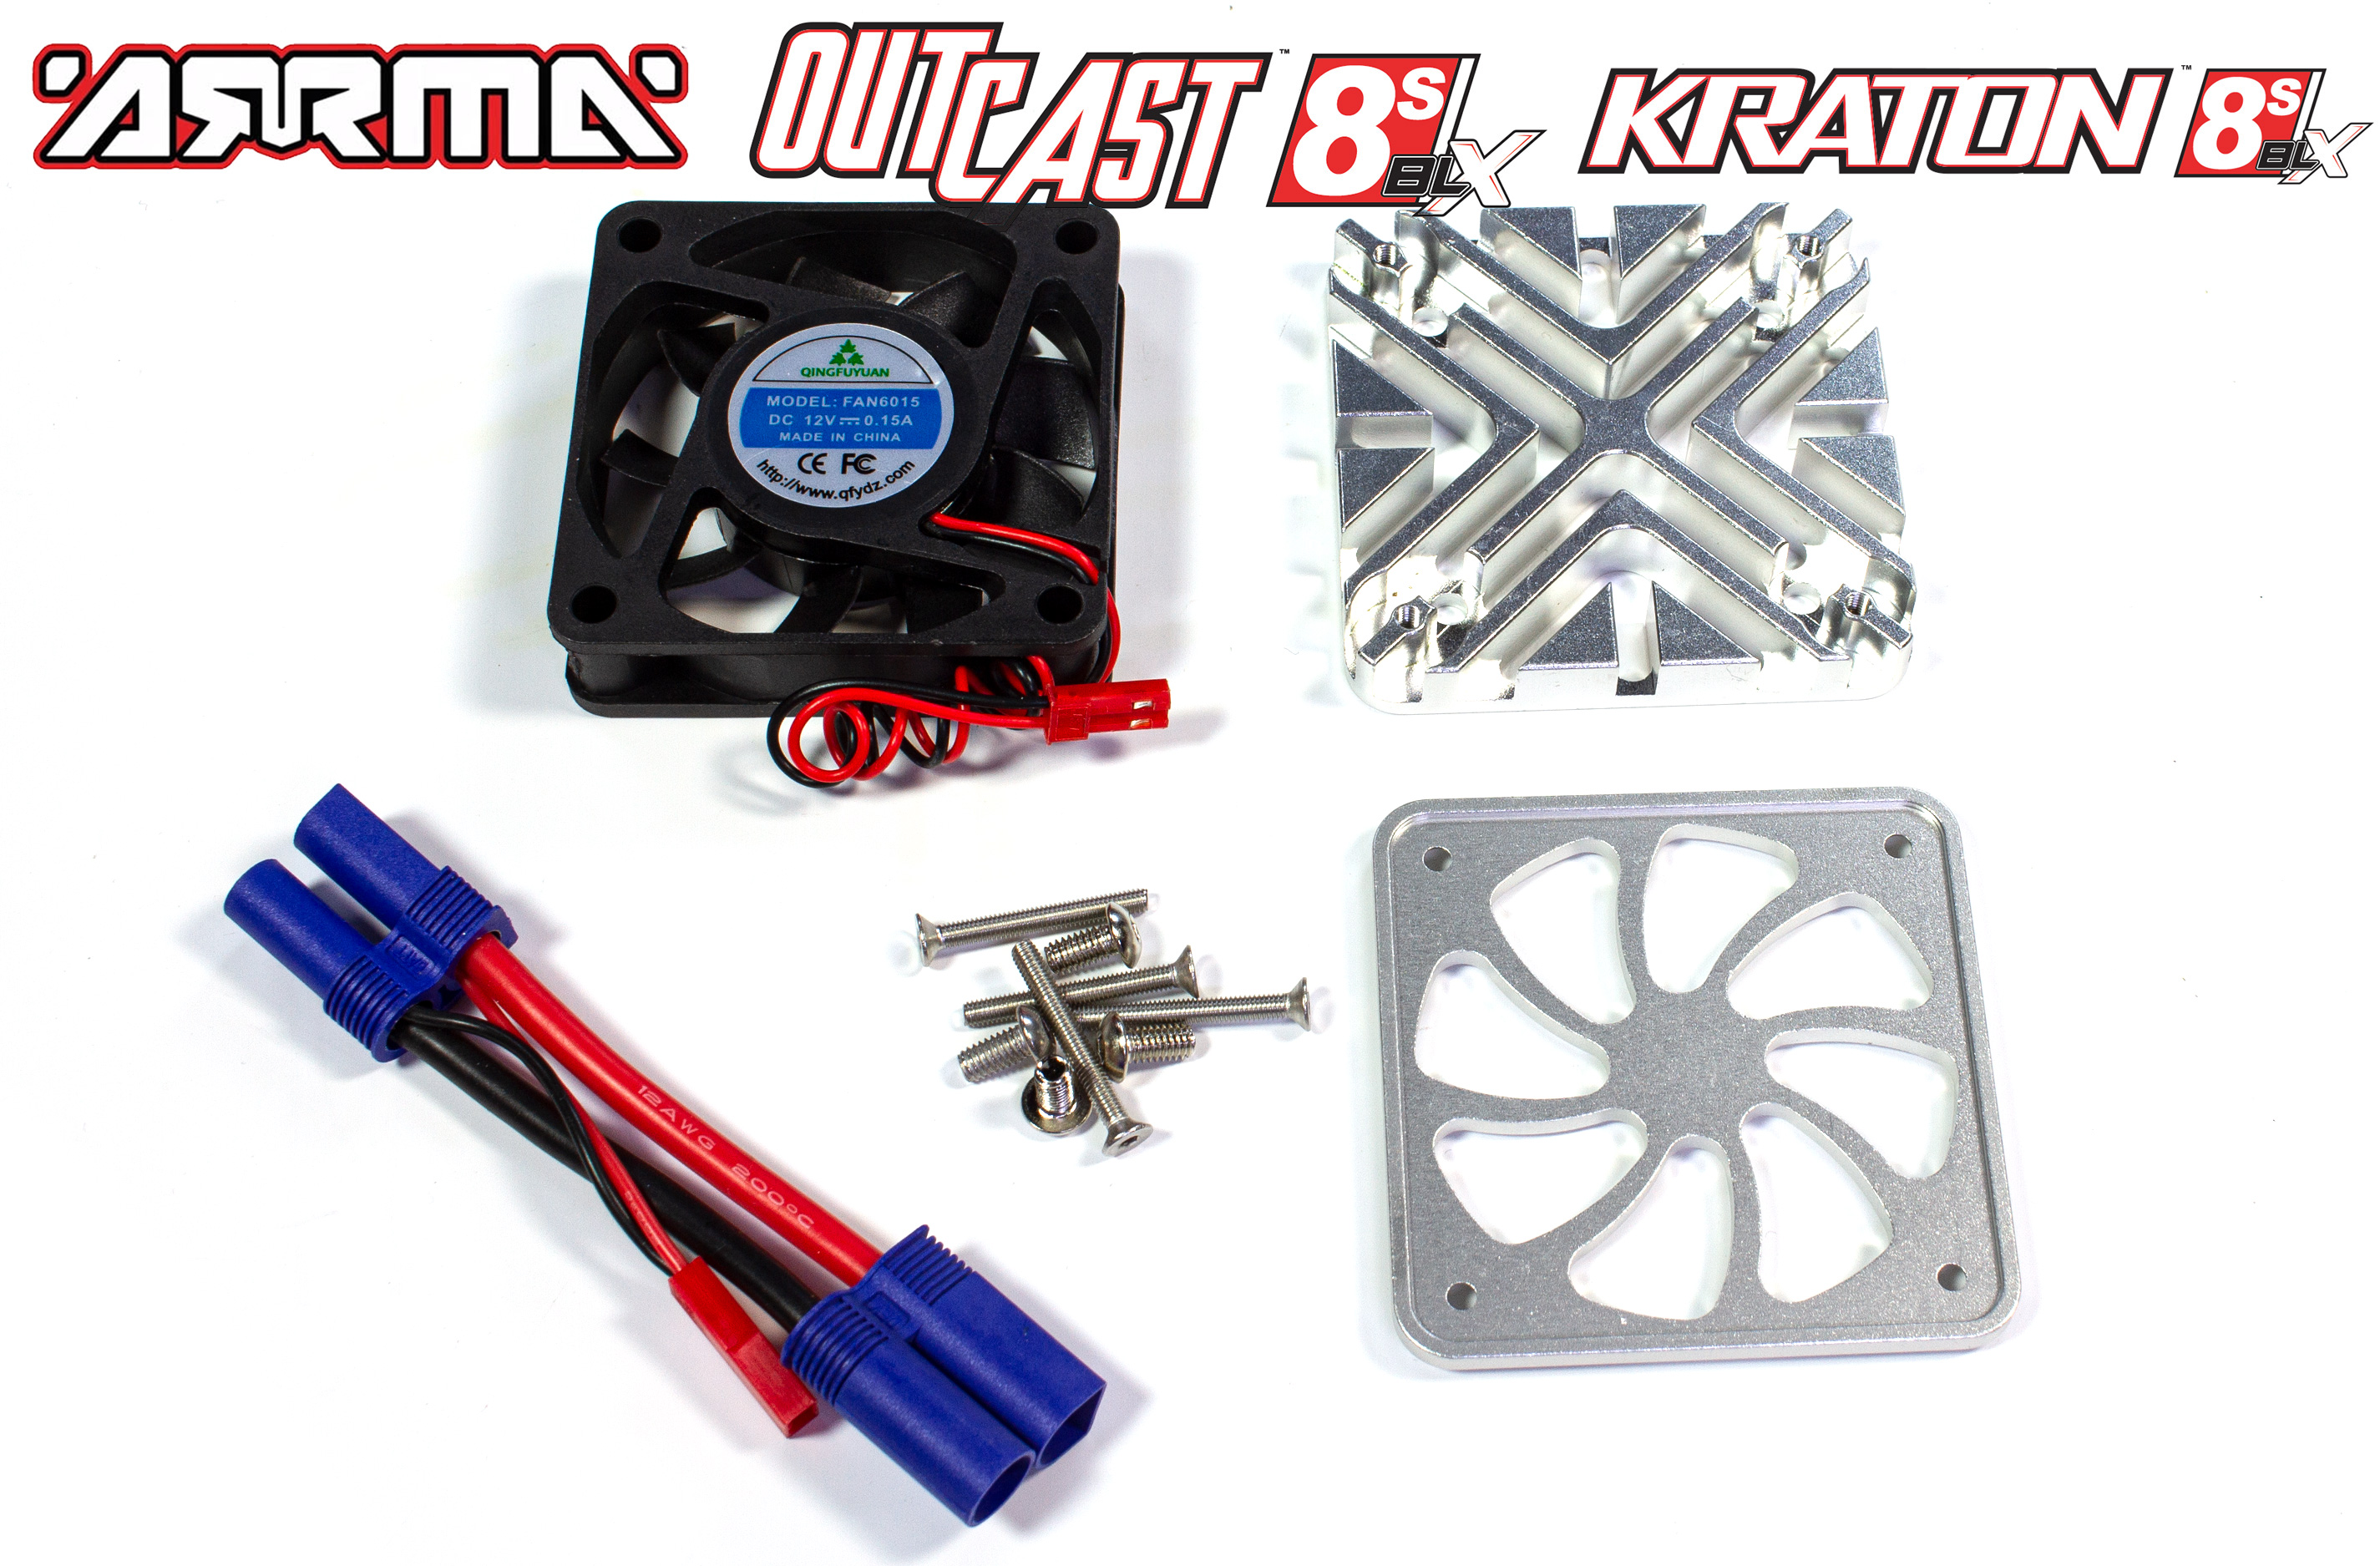 AKX018 GPM additional heat sink with fan for Arrma Kraton / Outcast 8S